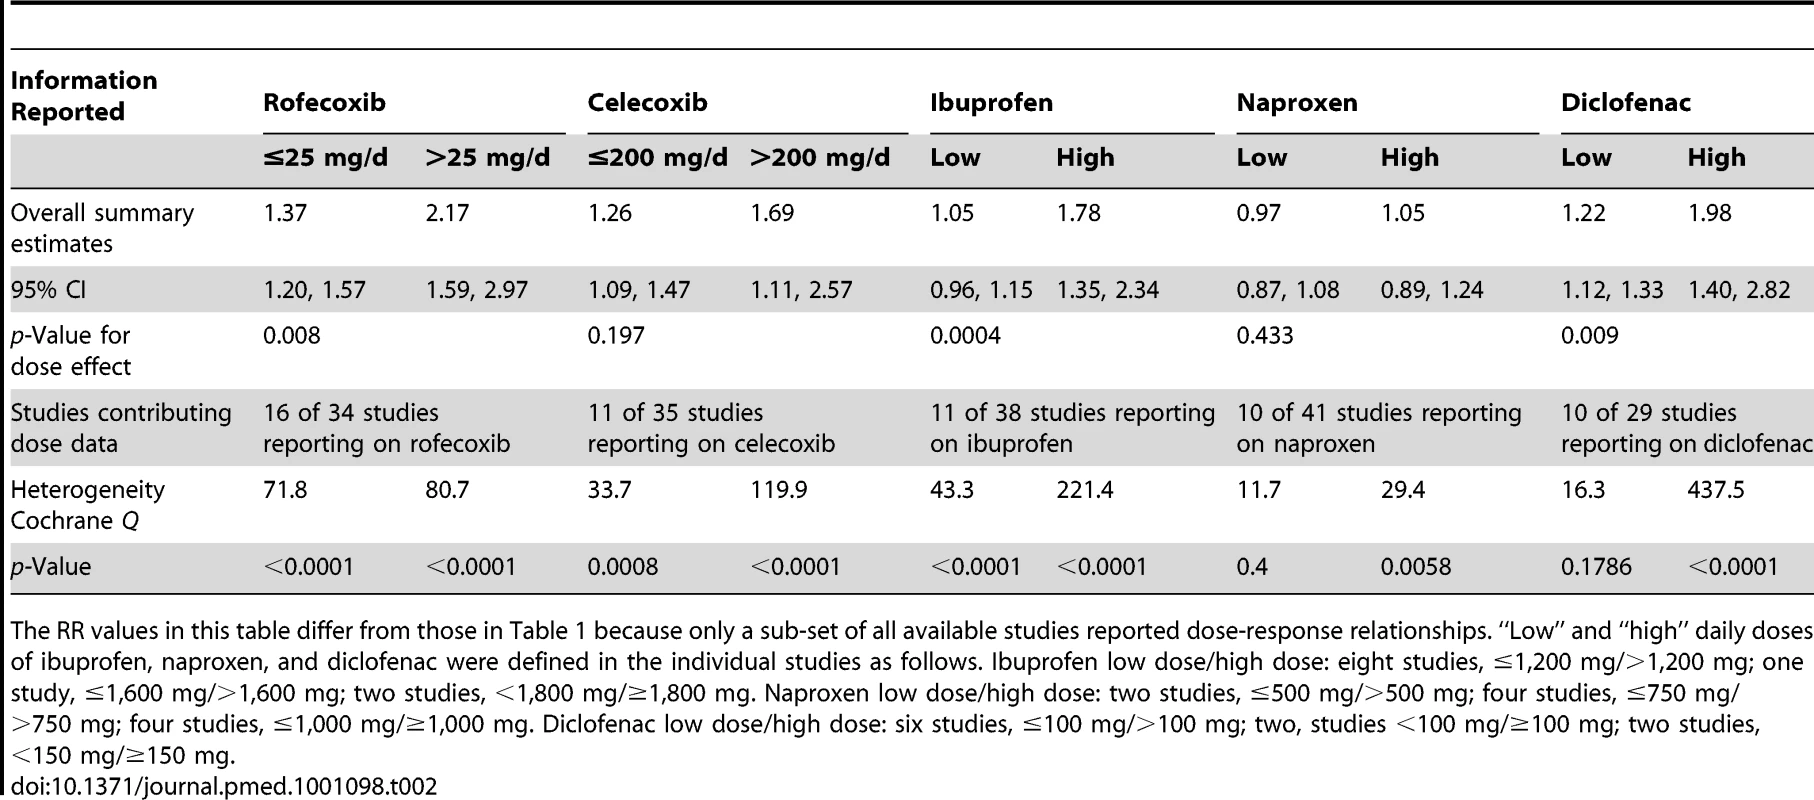 Dose-response relationships for individual drugs included in the analyses.